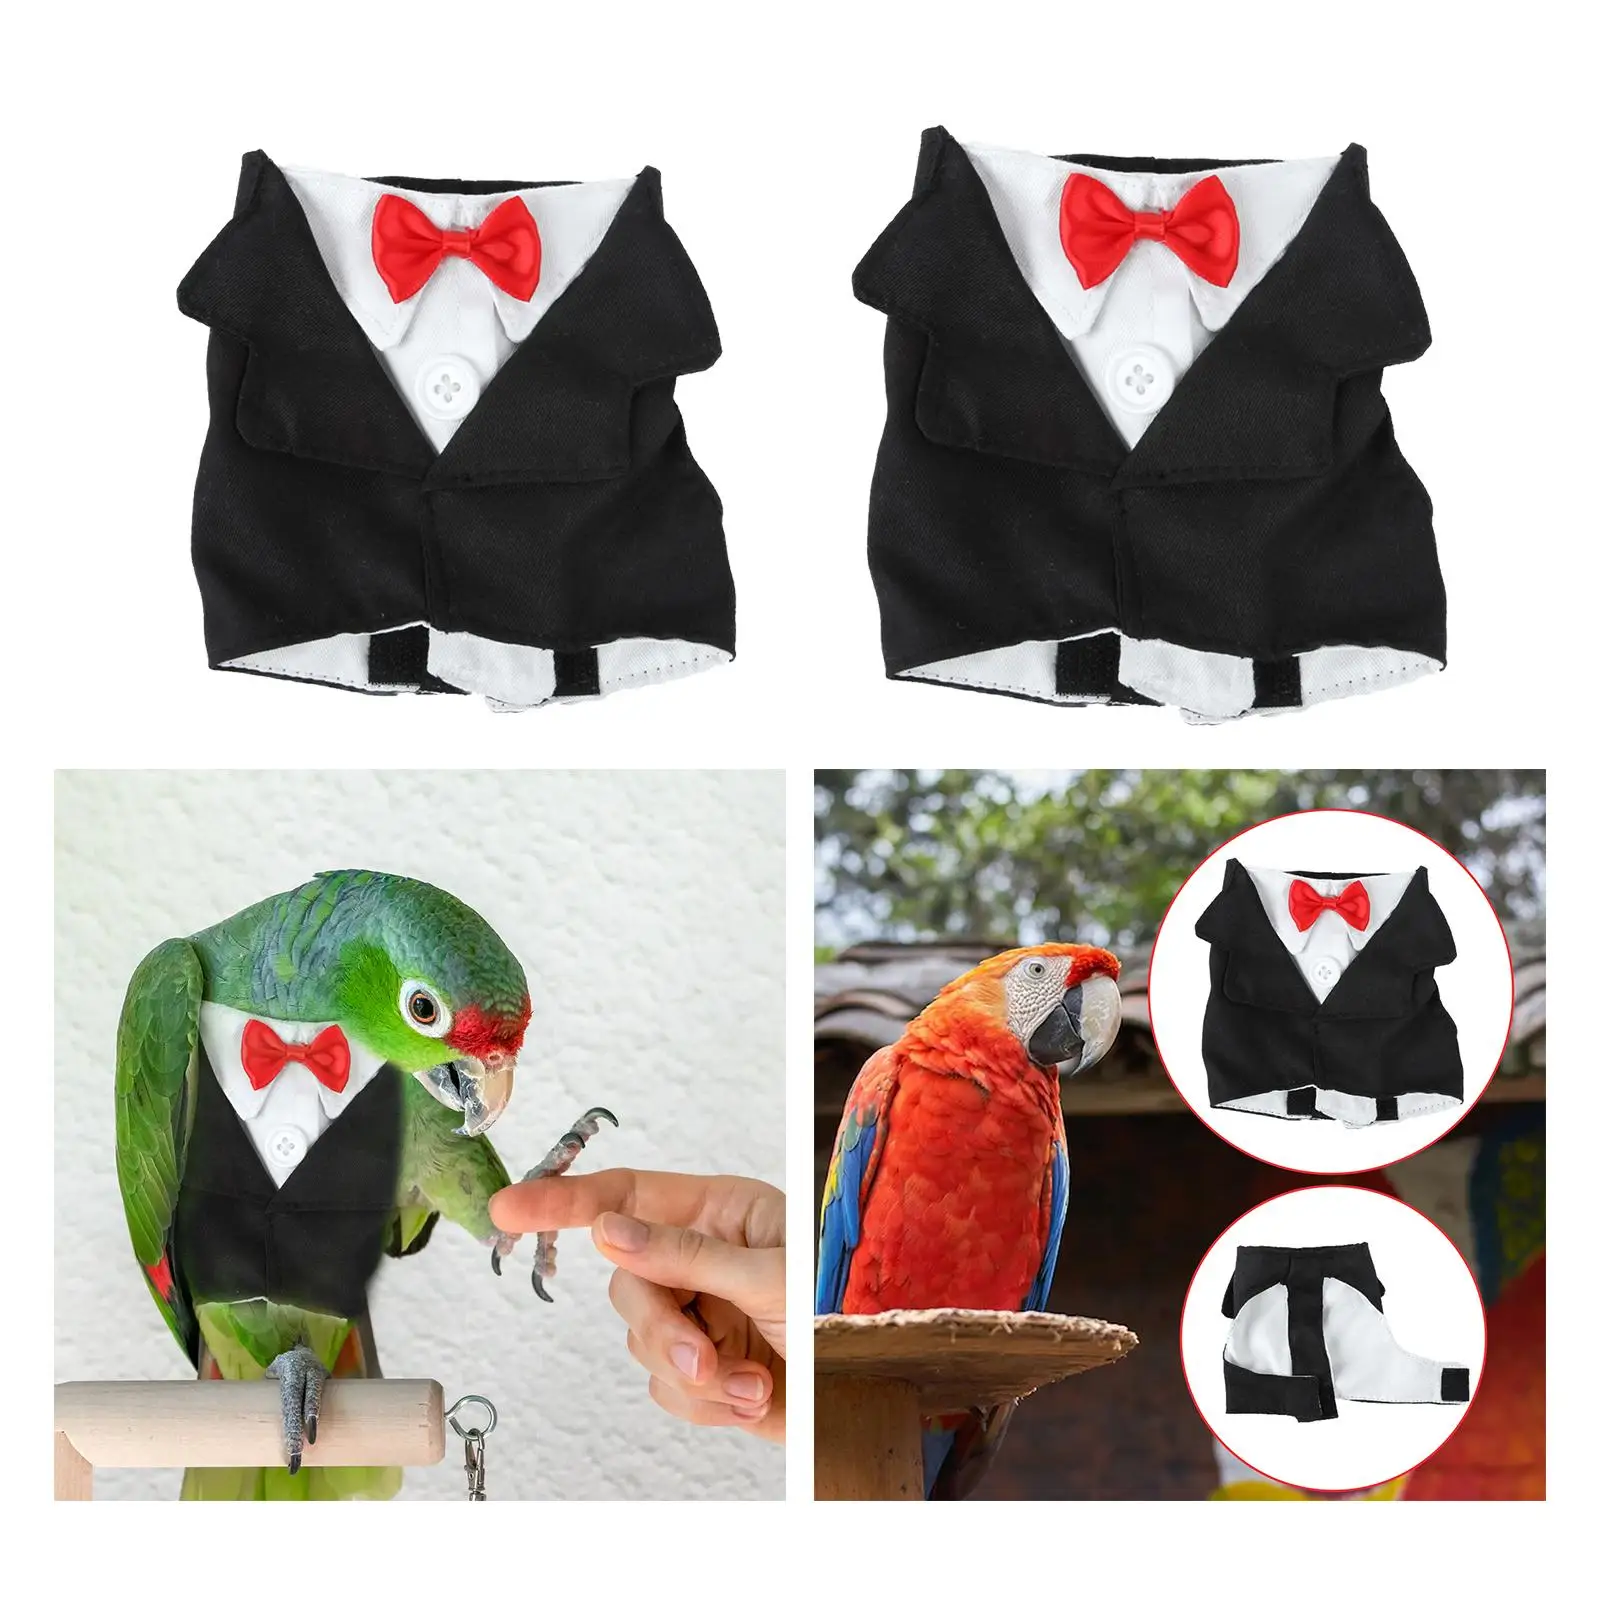 Reusable Parrots Suit Uniform with Bow Tie Pigeons Pets Supplies Cosplay Birds Clothes for Birthday African Greys Wedding Budgie